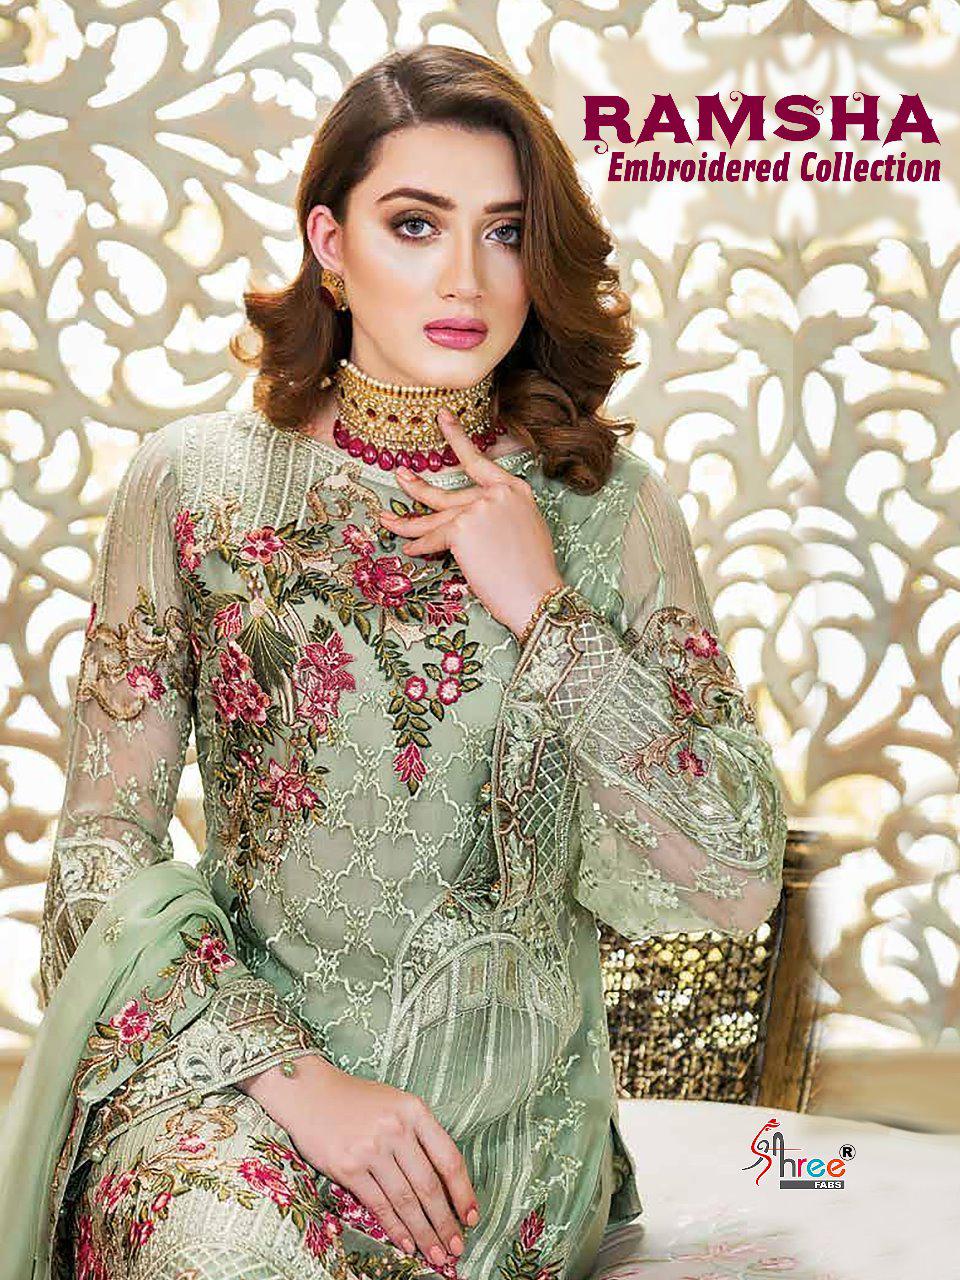 Shree fabs ramsha embroidered collection wedding wear designer suits collection